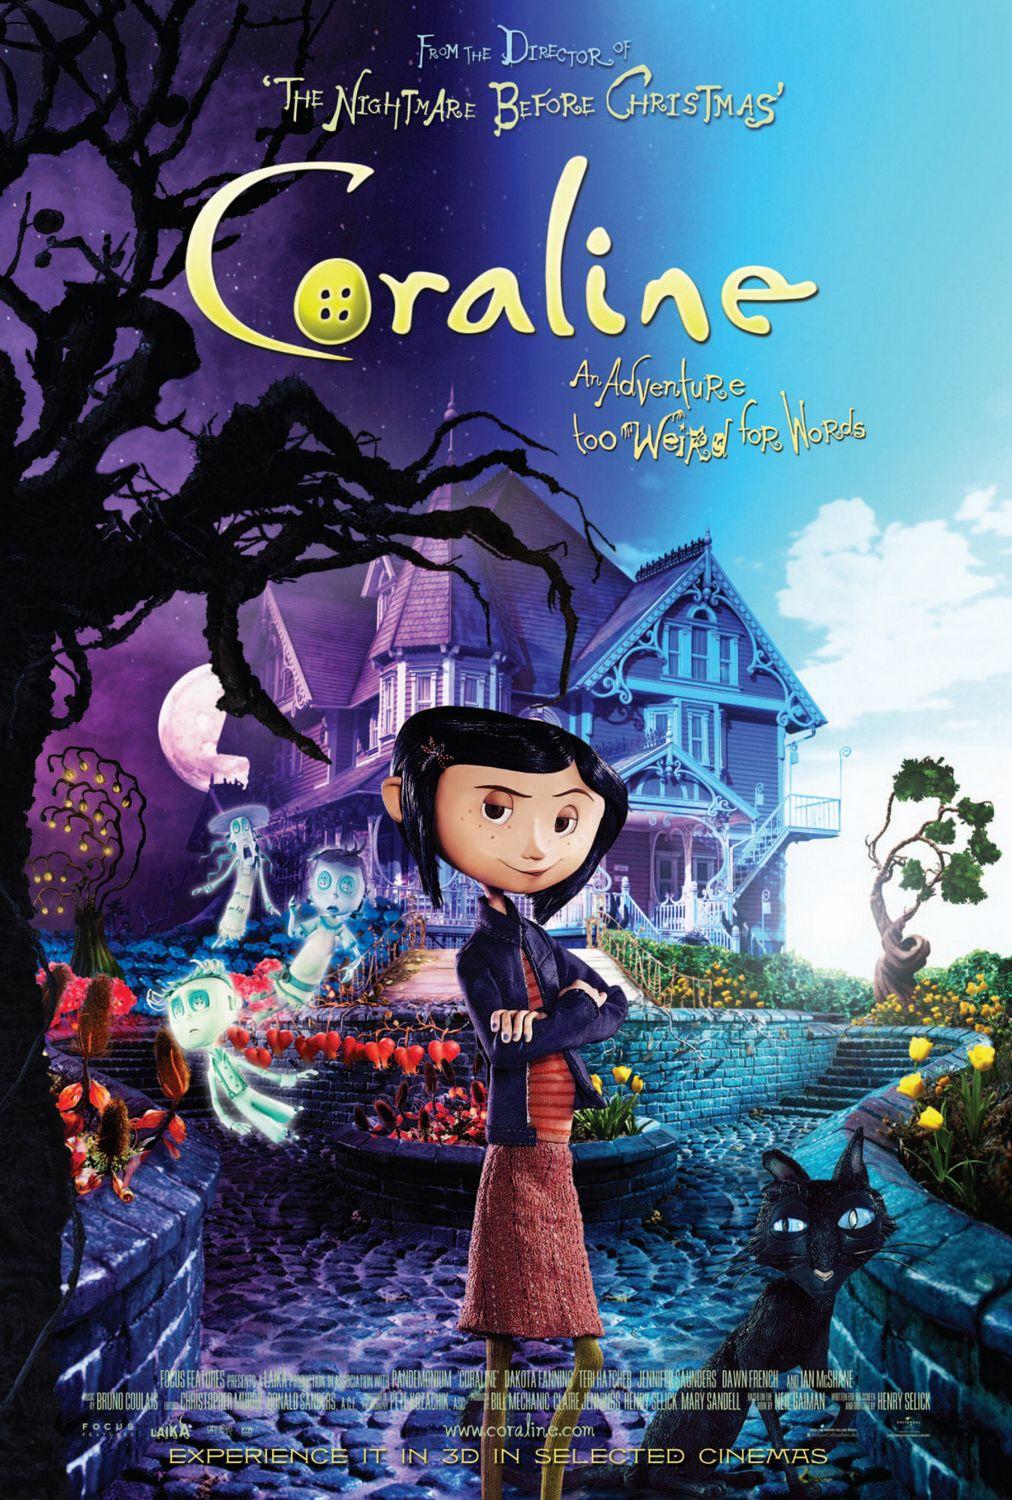 Coraline but it does; she uncovers a secret door in the house. Walking through the door and then venturing through an eerie passageway, she discovers an alternate version of her life and existence.